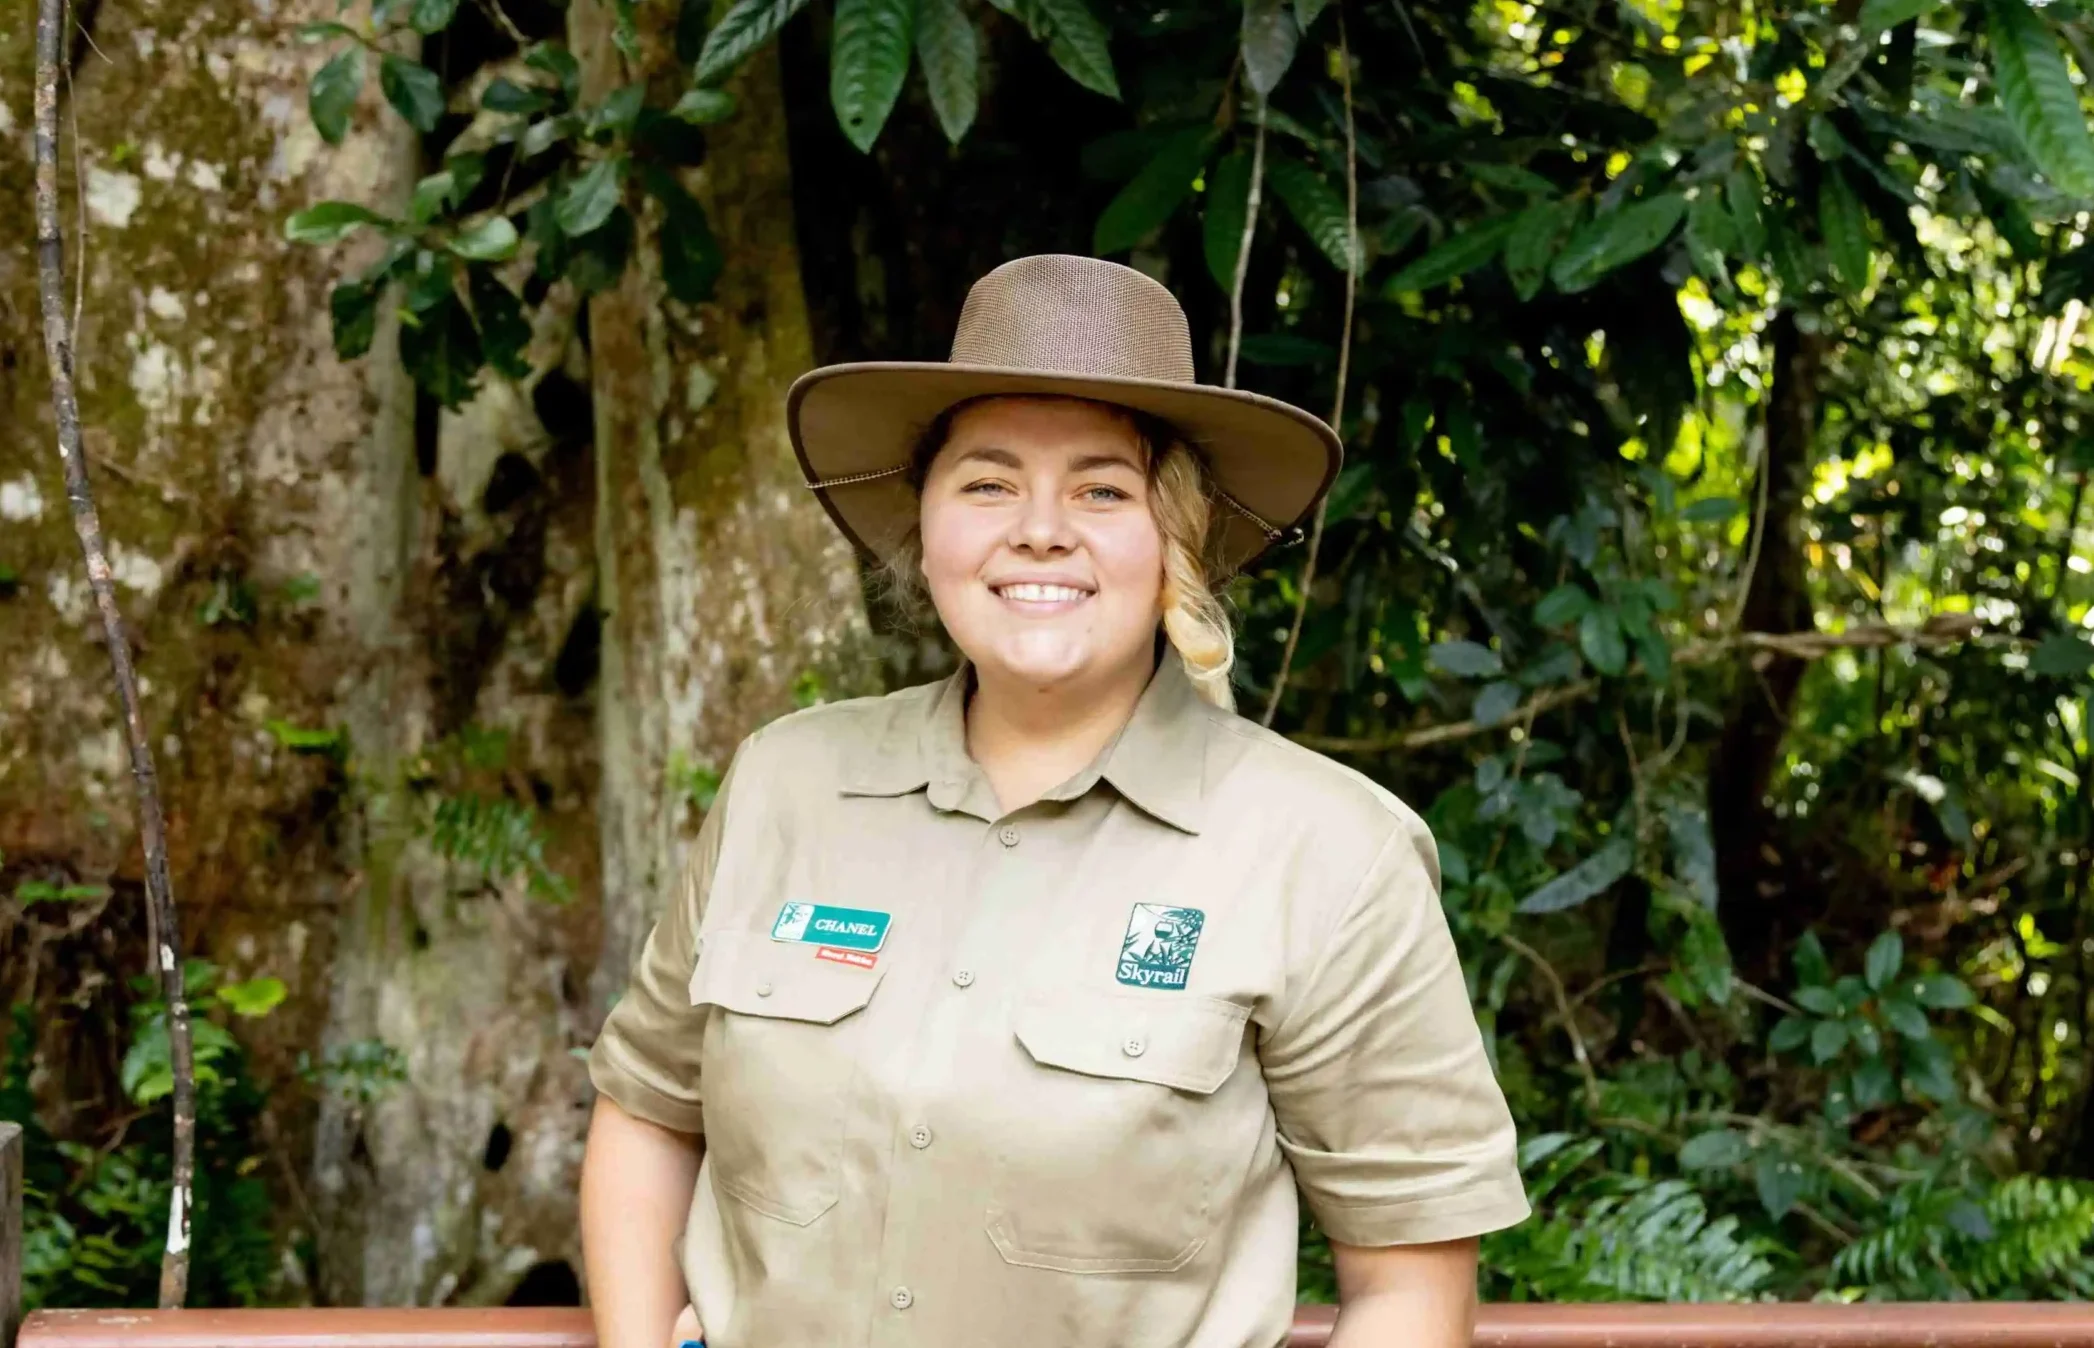 Skyrail Ranger Chanel stands smiling at the camera with rainforest behind her